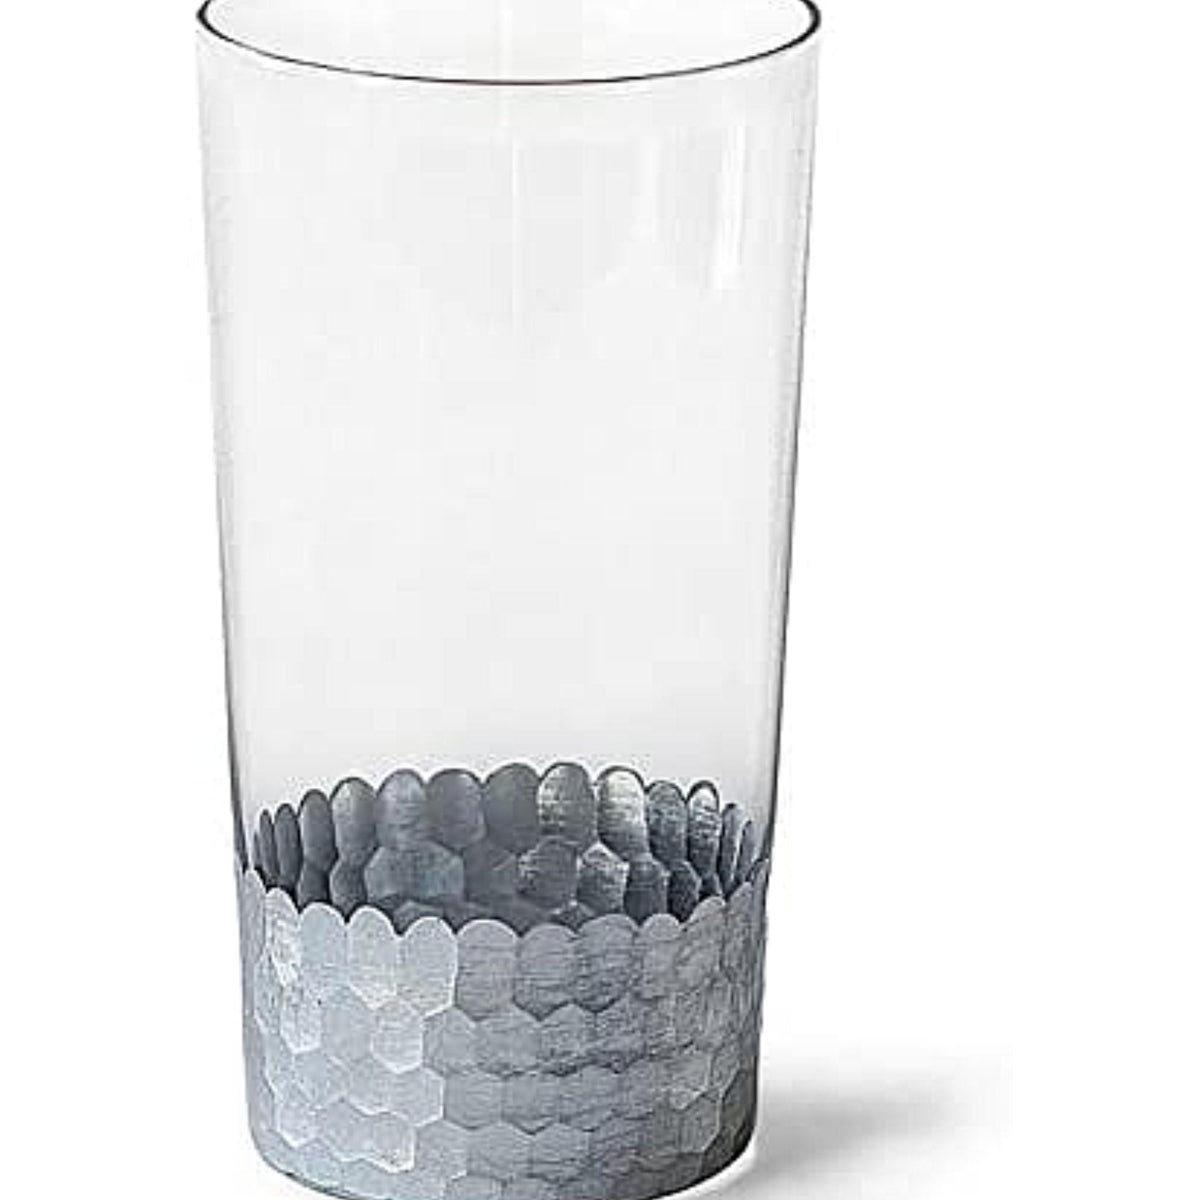 HOSELY® Argea Floral Glass Vase 6.25 Inches High, Silver Finish